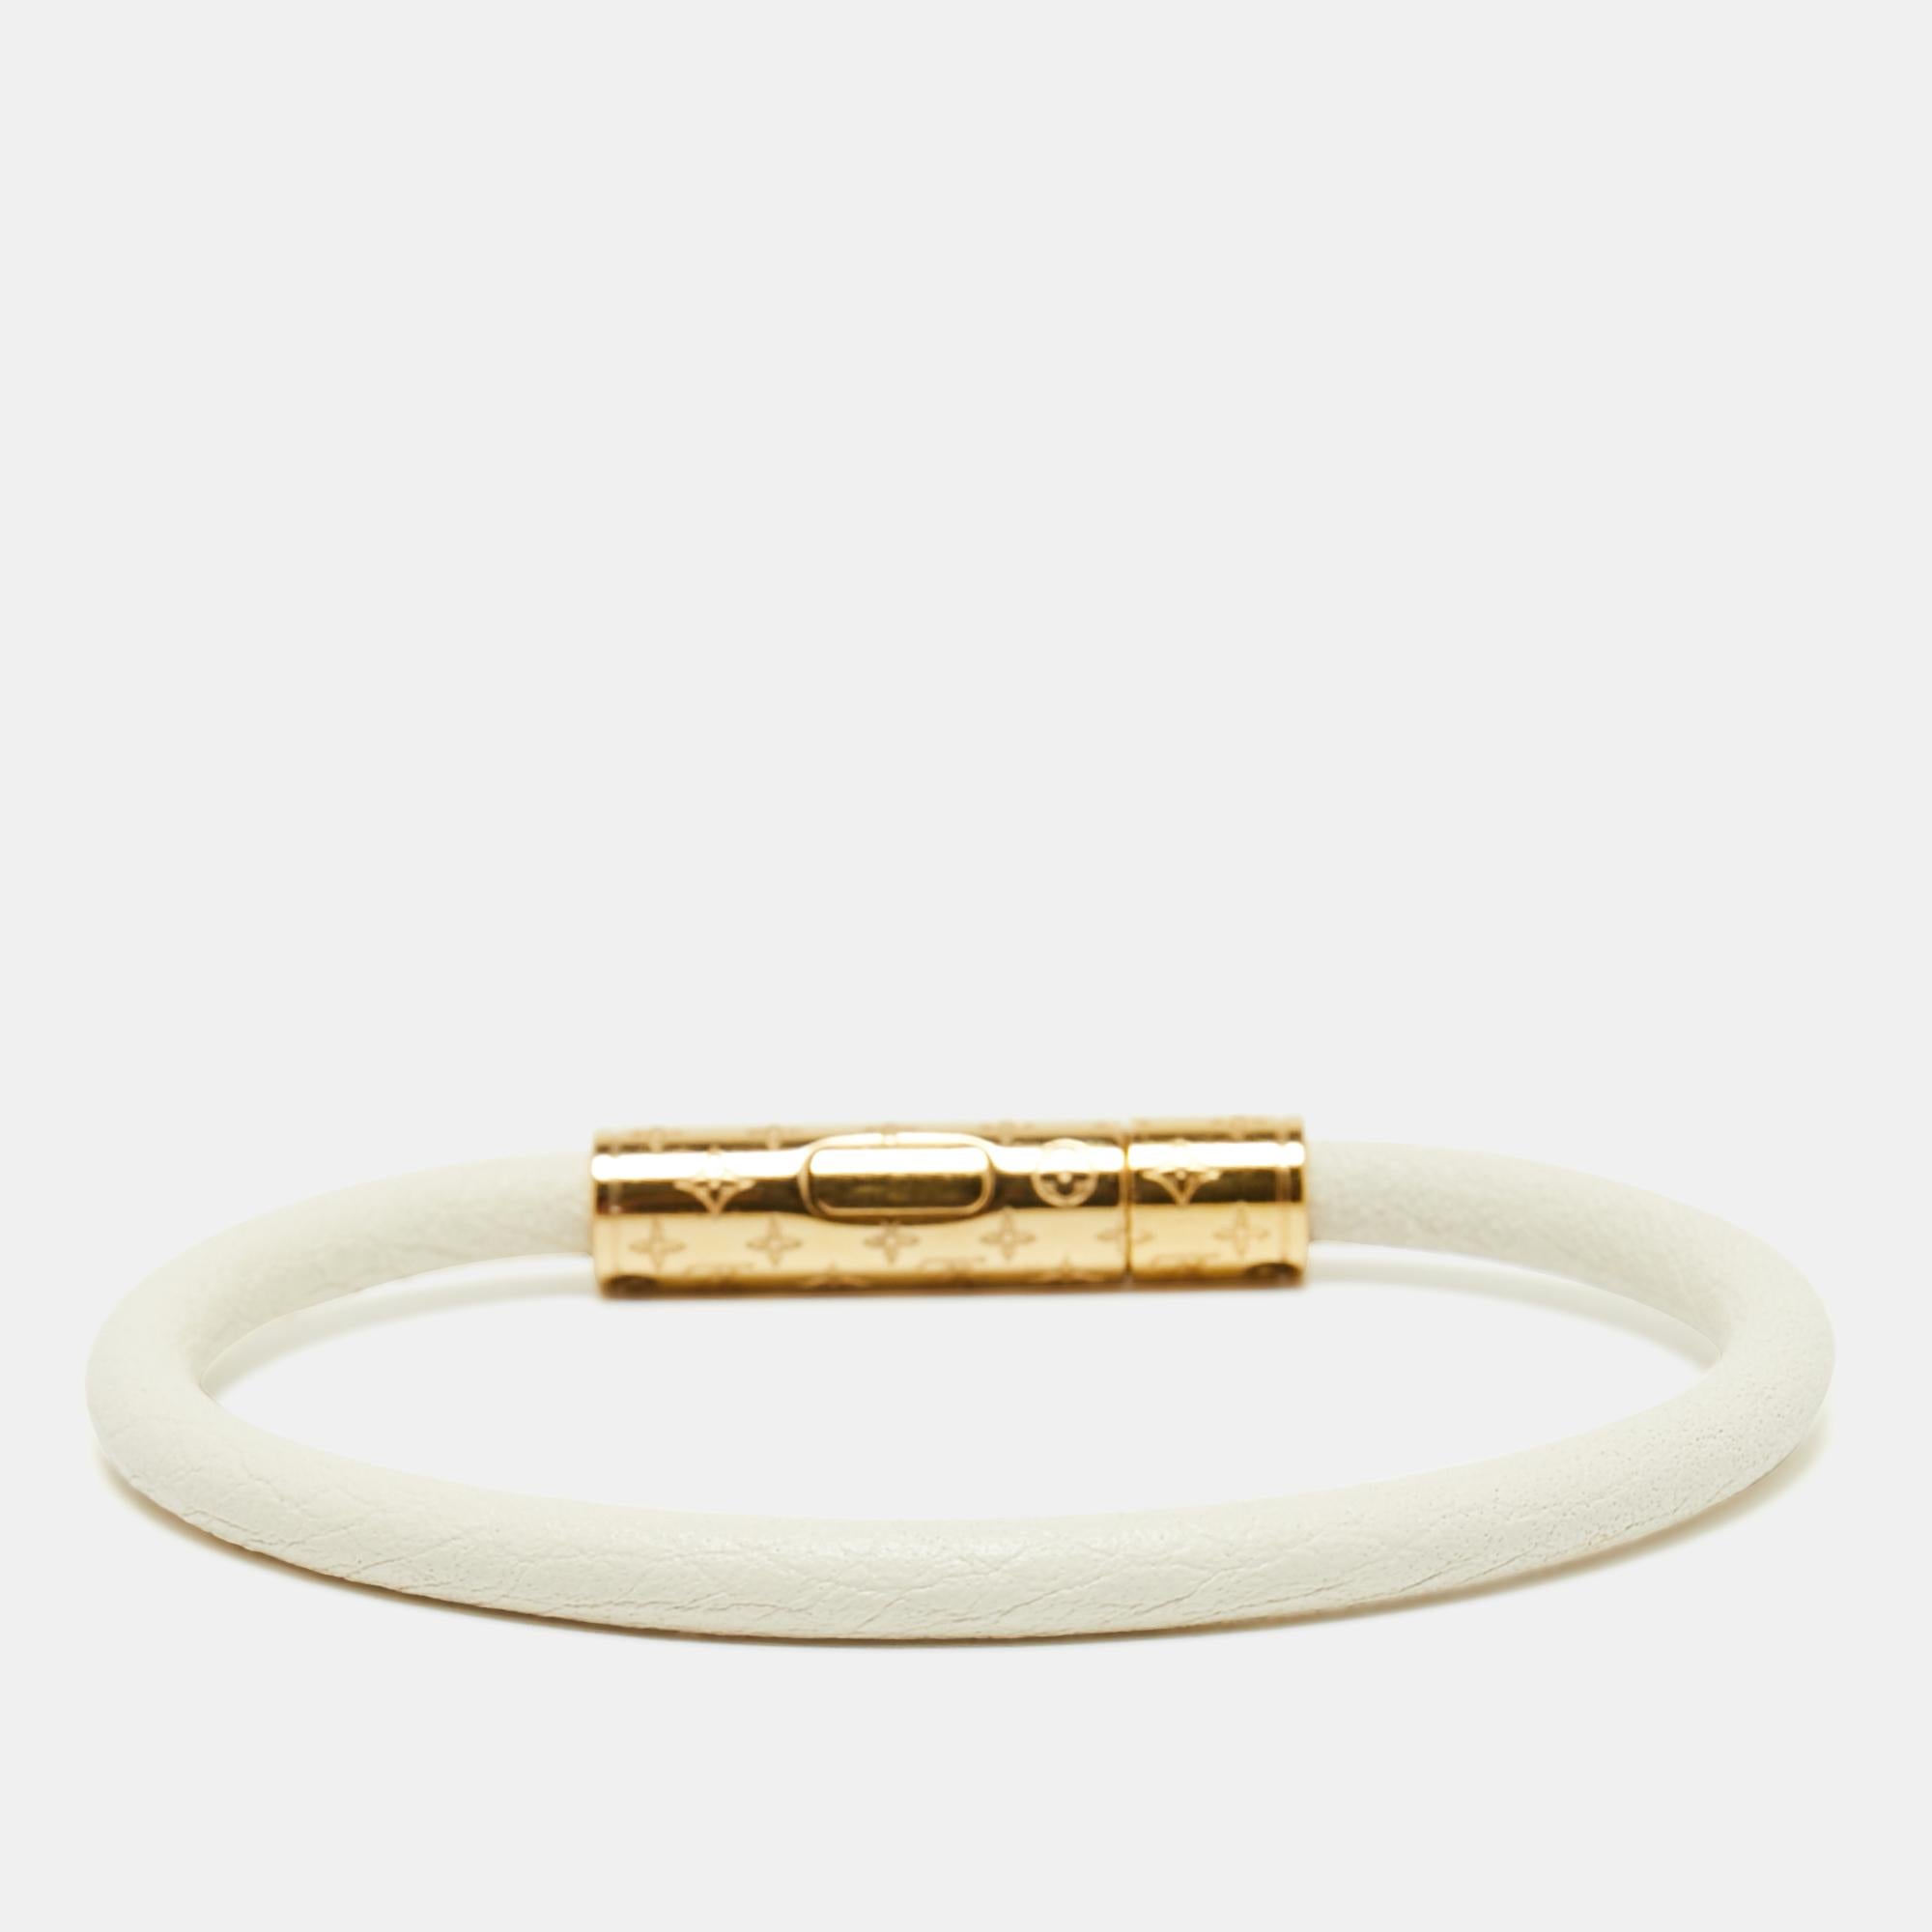 Let all eyes be on you when you step out wearing this fabulous Confidential bracelet from Louis Vuitton! The lovely white creation is crafted from leather and styled with a gold-tone metal fastener that is engraved with the signature